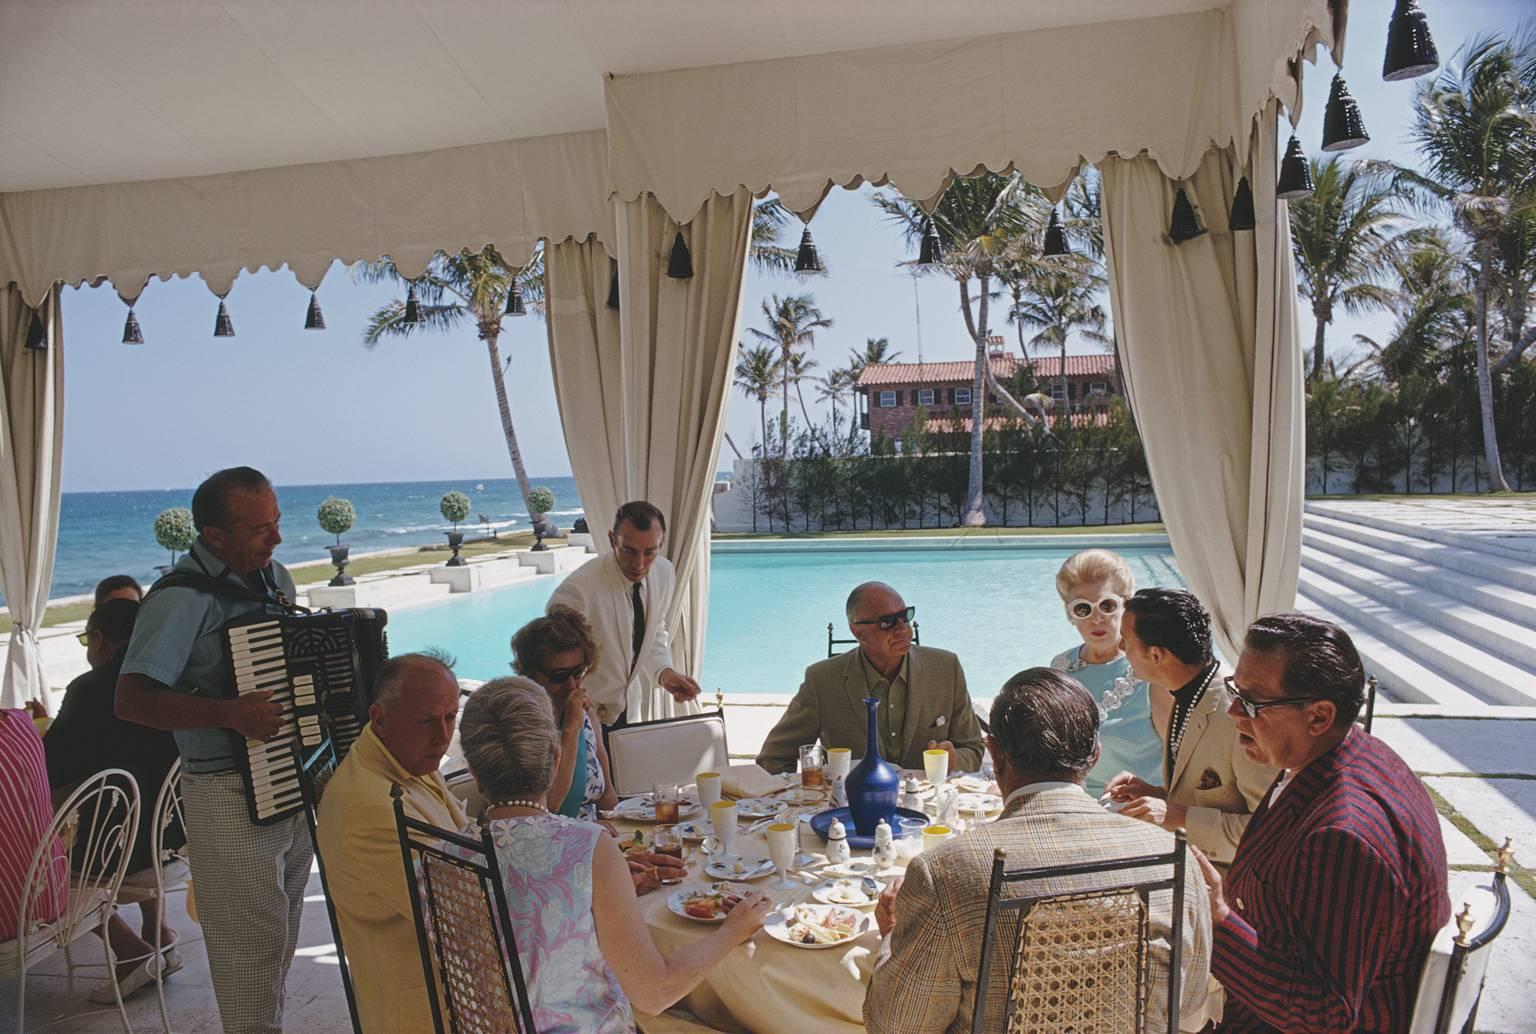 'Dining at Wilmot's' by Slim Aarons

Accordion music accompanies a meal by the pool at the home of Molly Wilmot in Palm Beach, Florida, April 1968.

This photograph epitomises the travel style and glamour of the period's wealthy and famous,